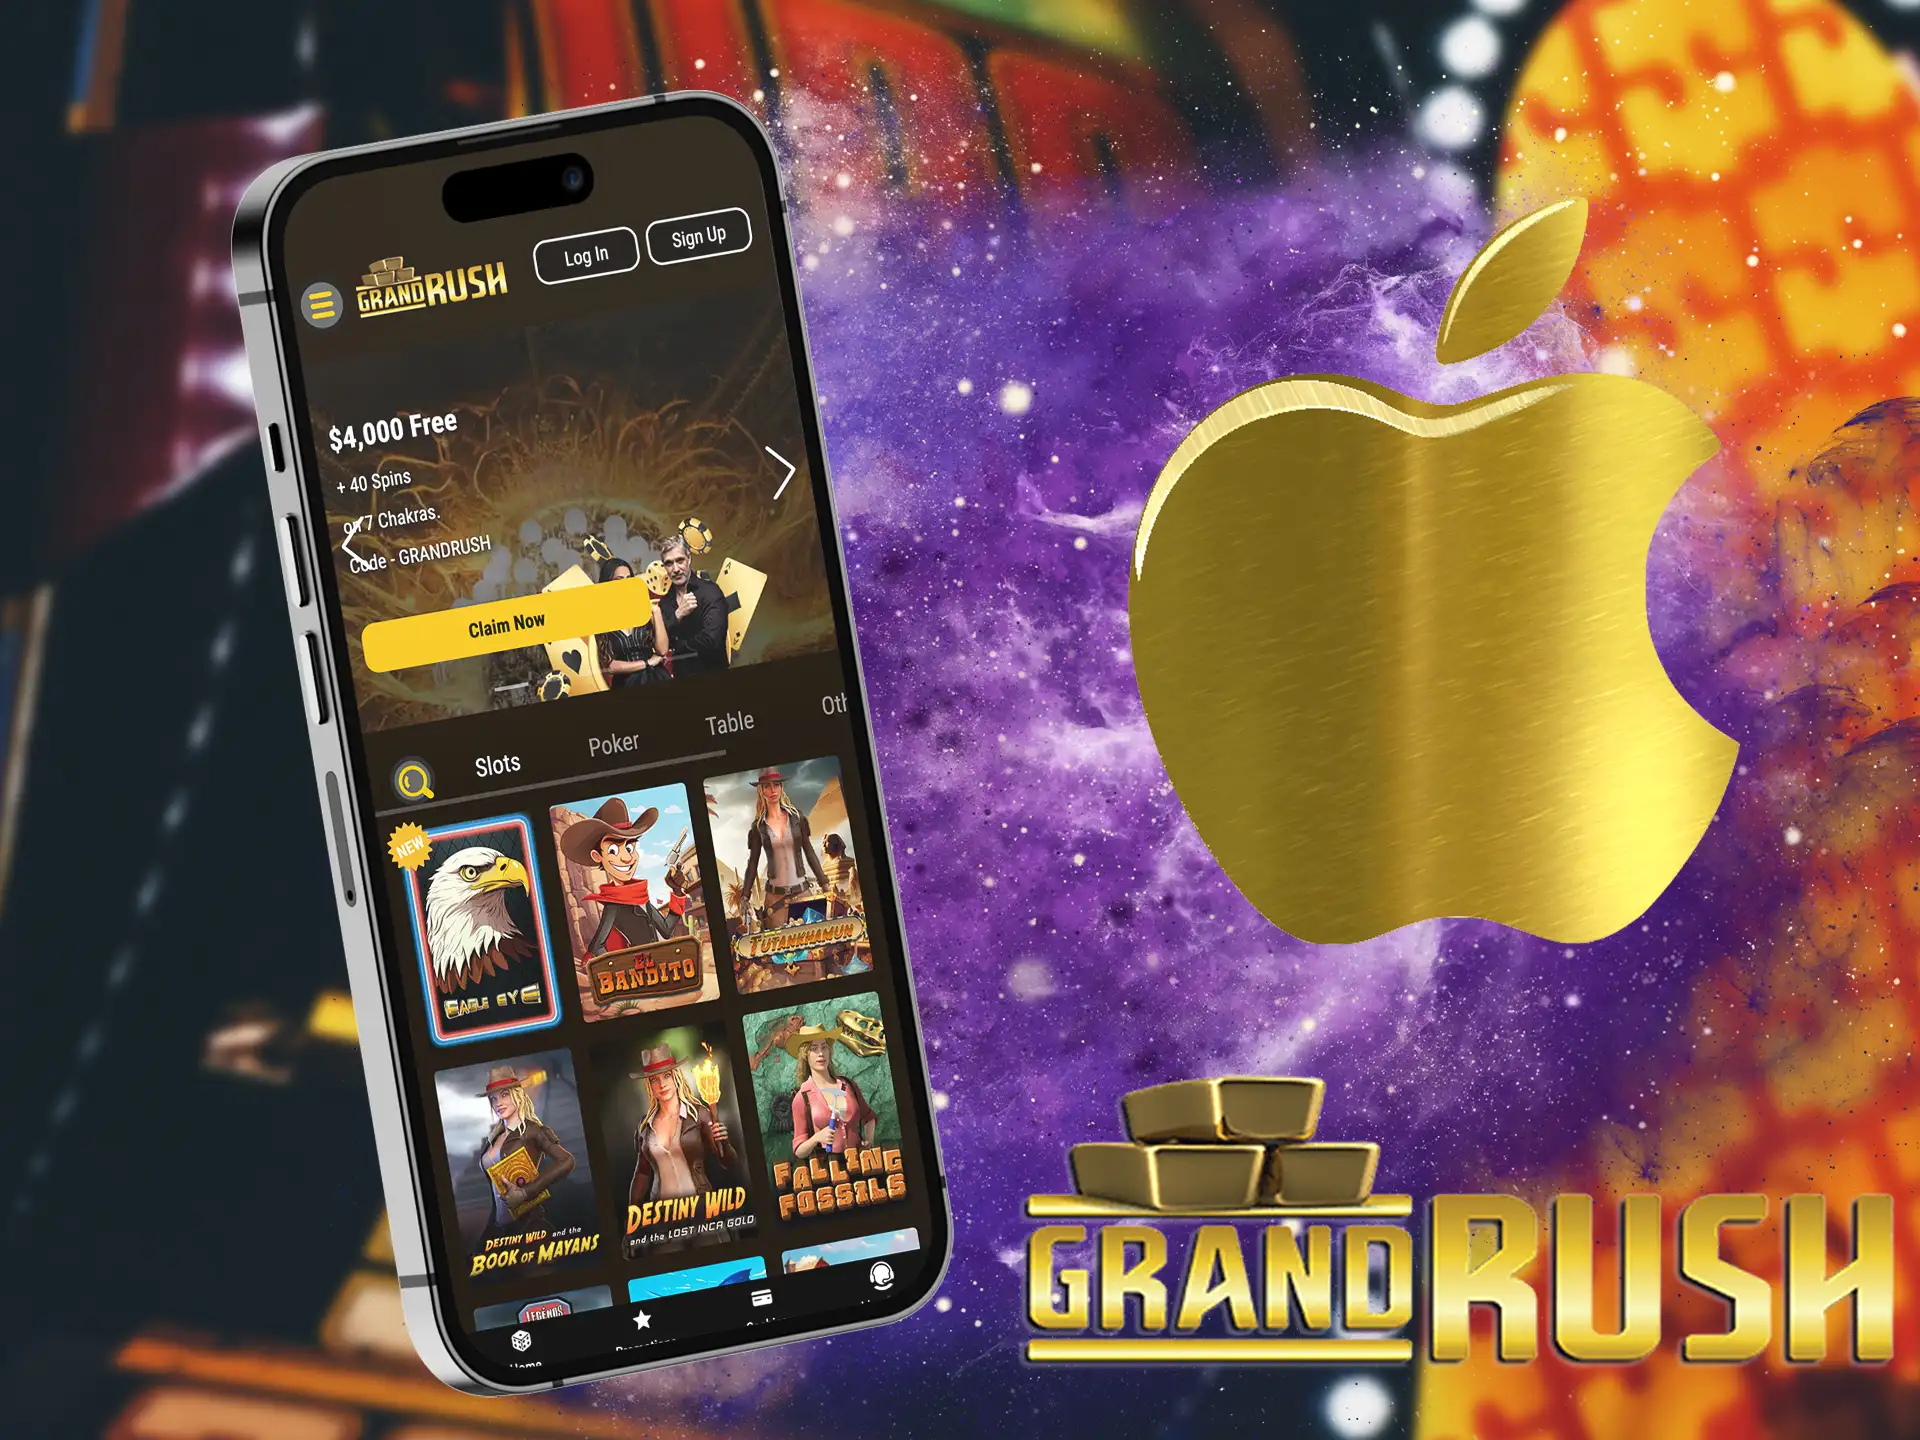 Try the Grand Rush mobile version on all iOS devices.